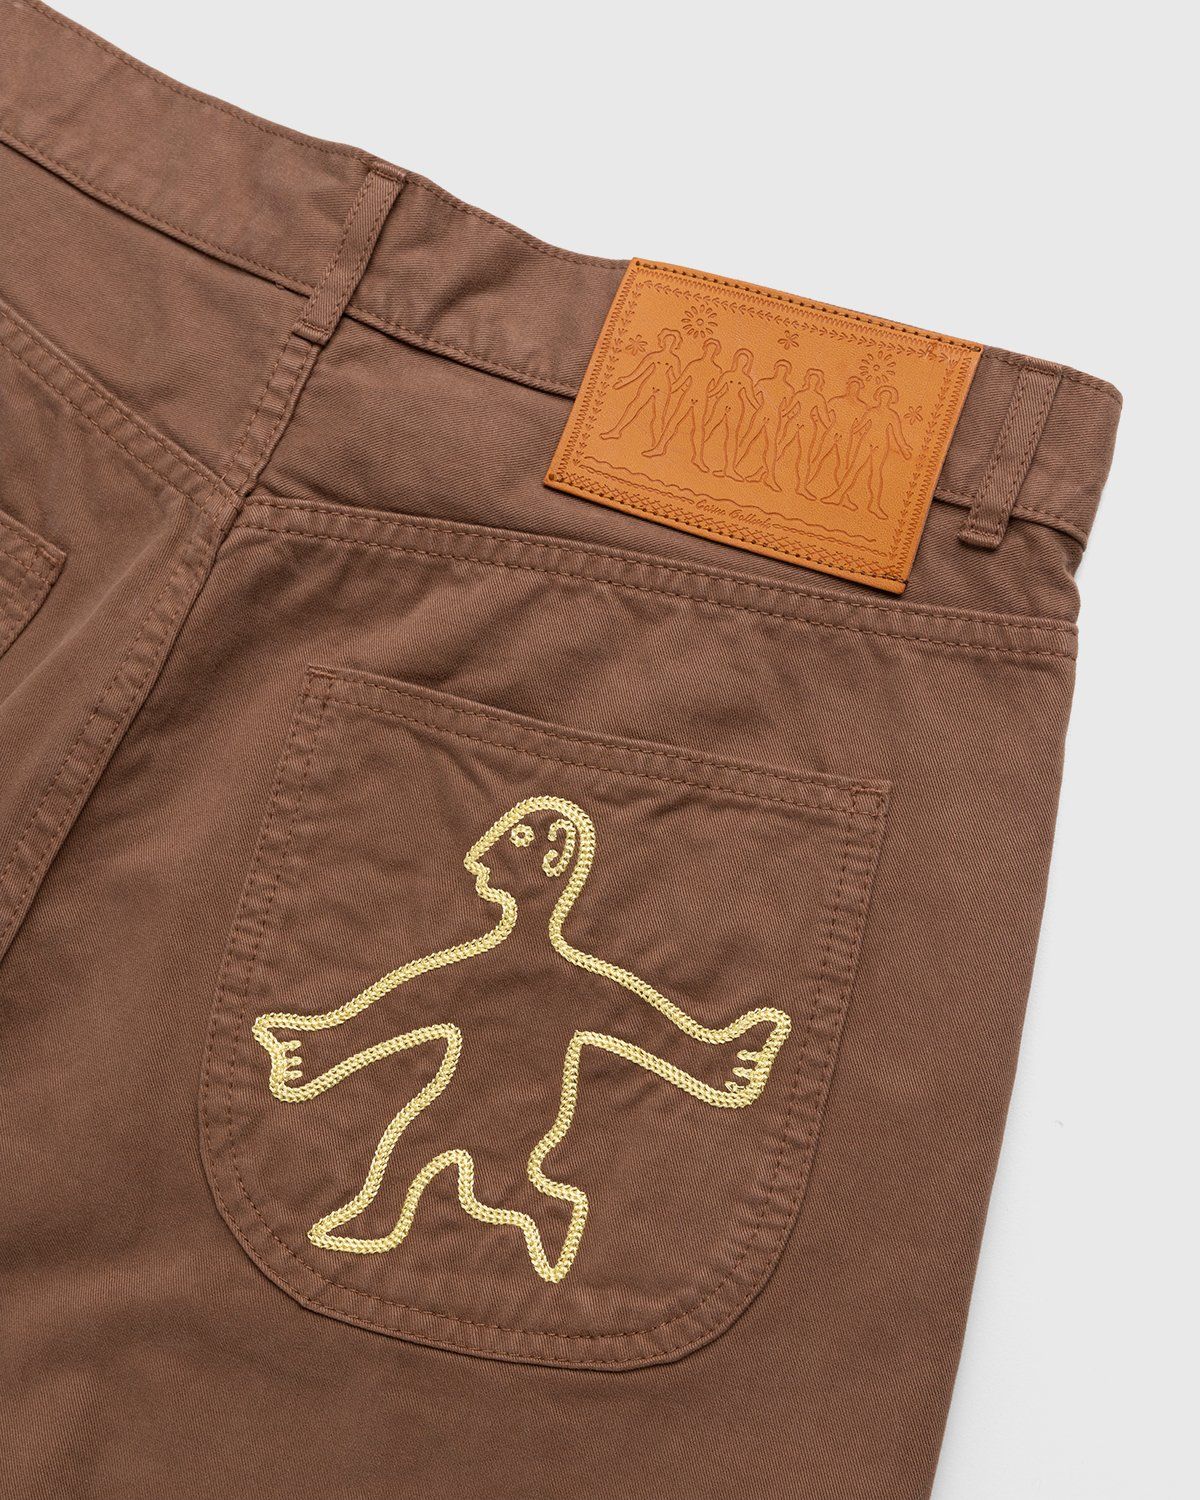 Carne Bollente – The Back Bump Trouser Brown - Pants - Brown - Image 5